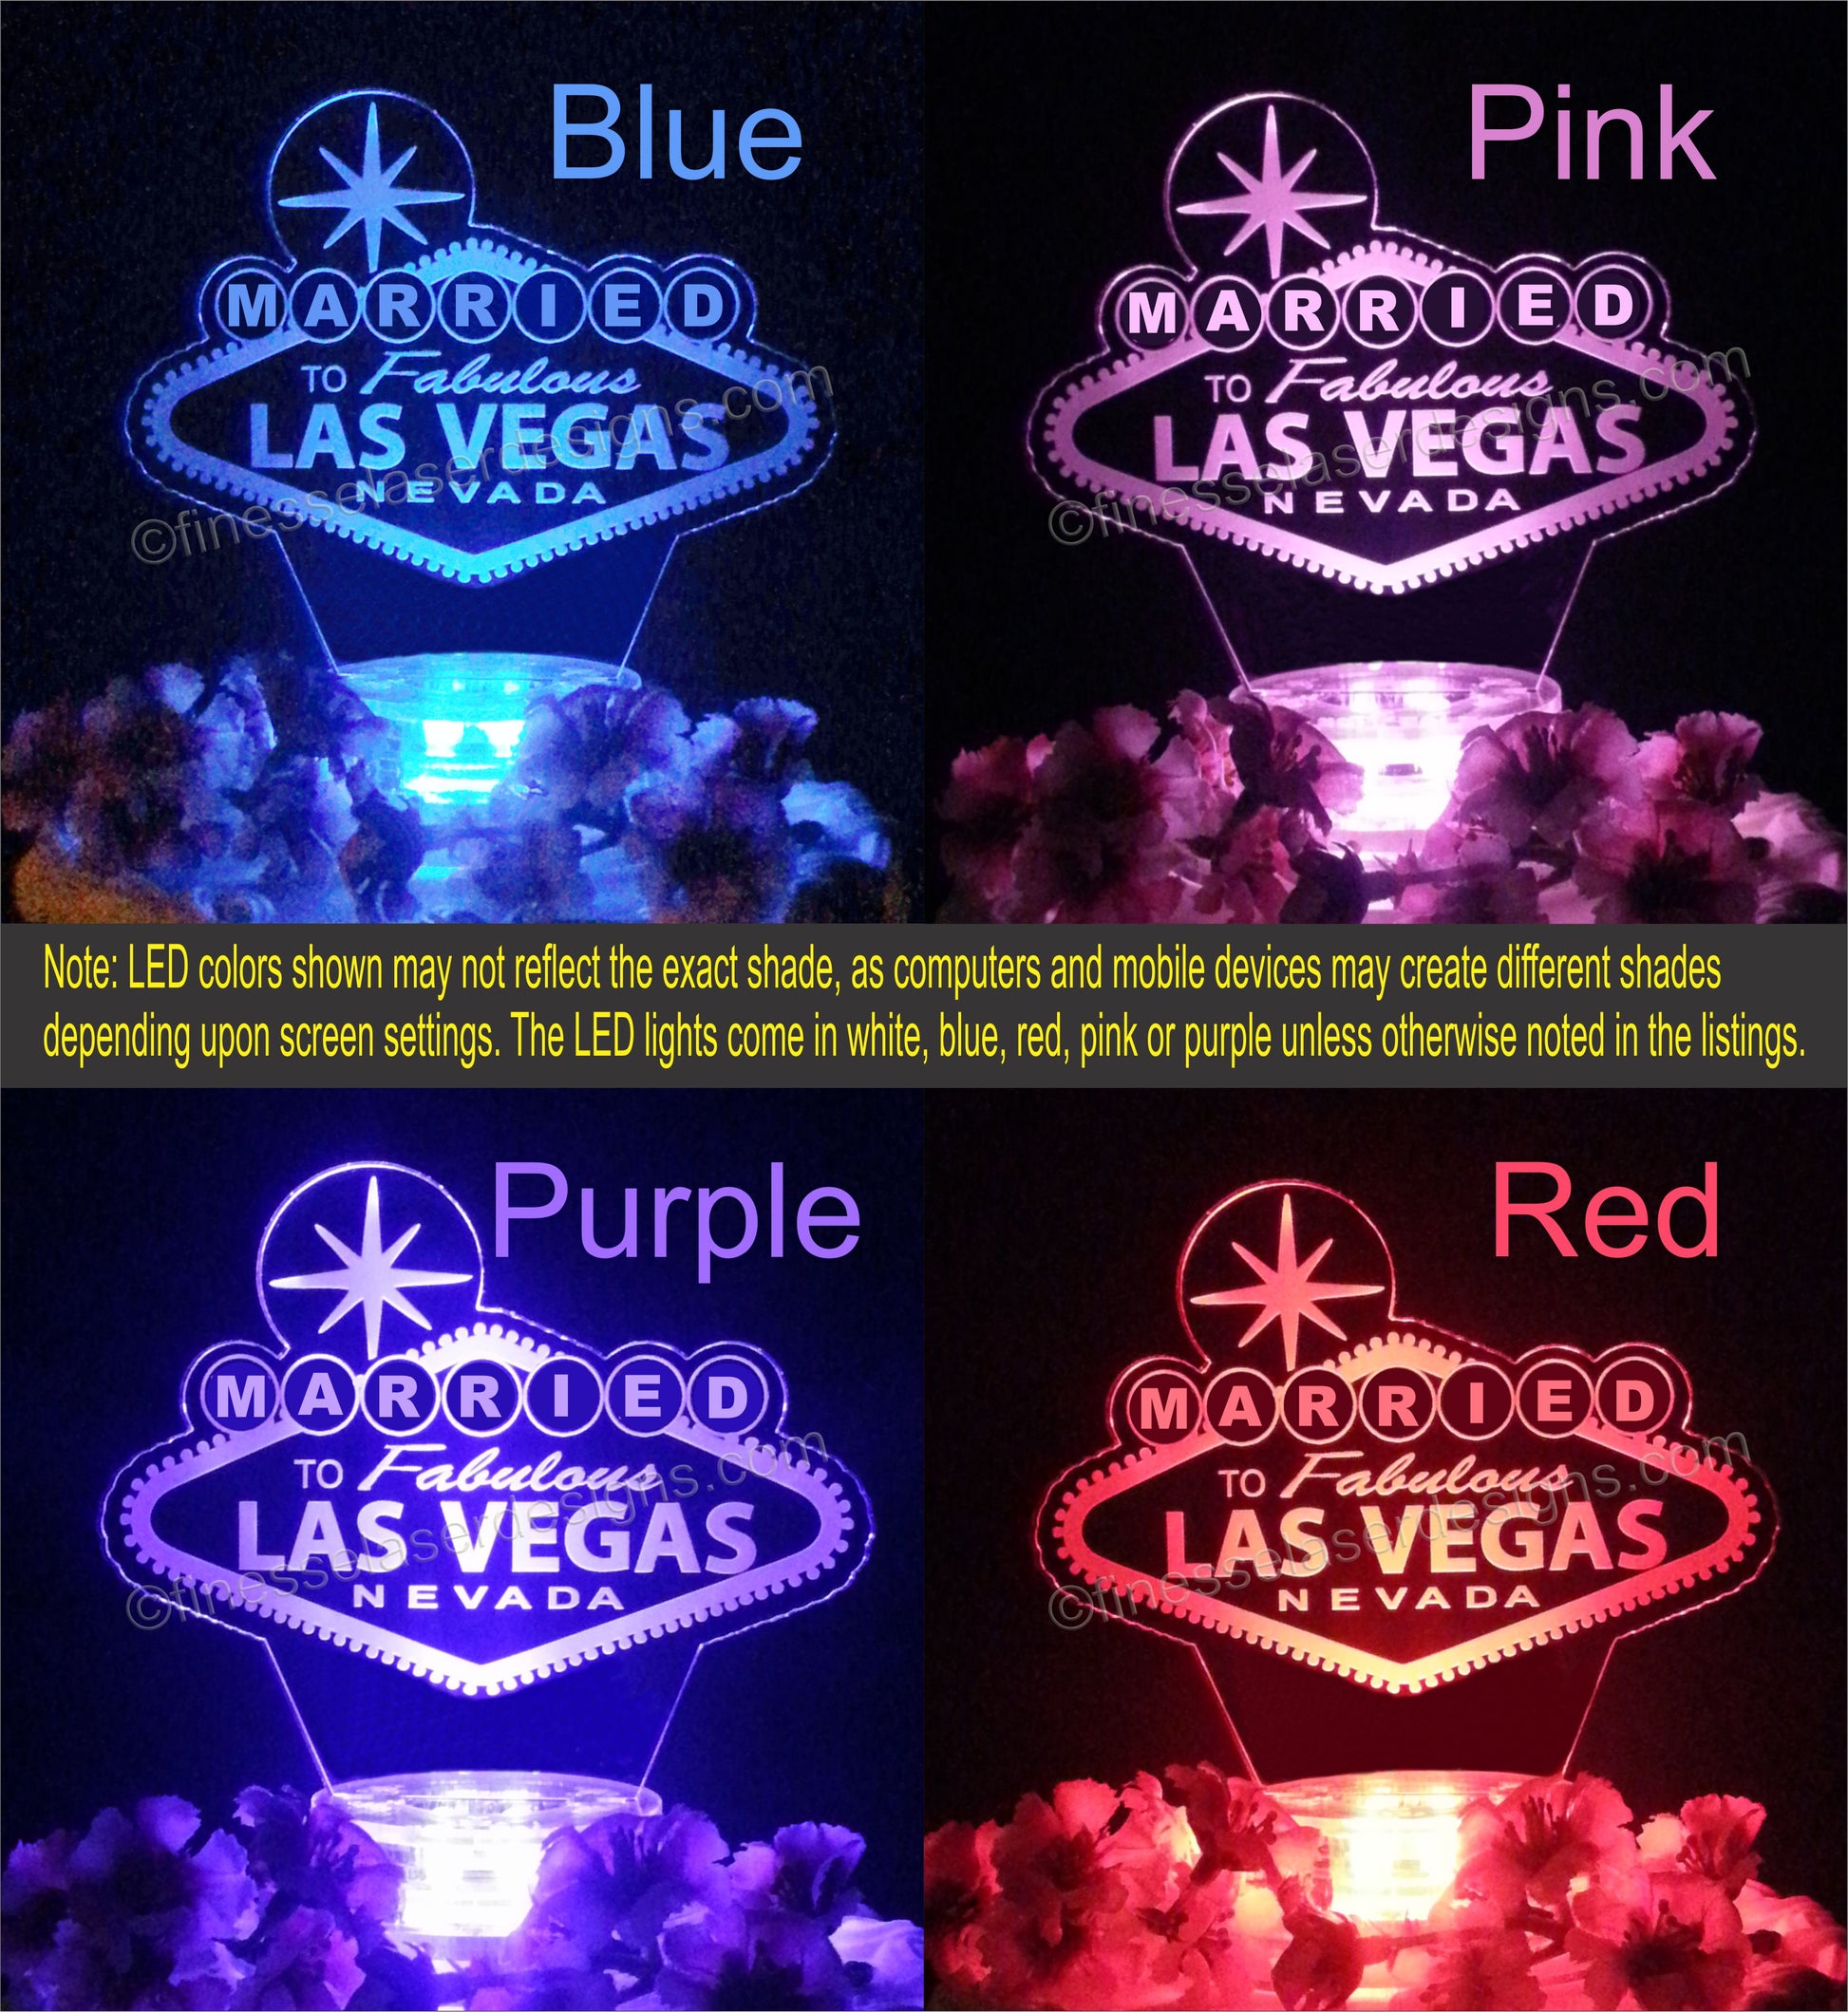 Colored views of acrylic cake topper with a Las Vegas theme showing pink, purple, blue, and red lighted views